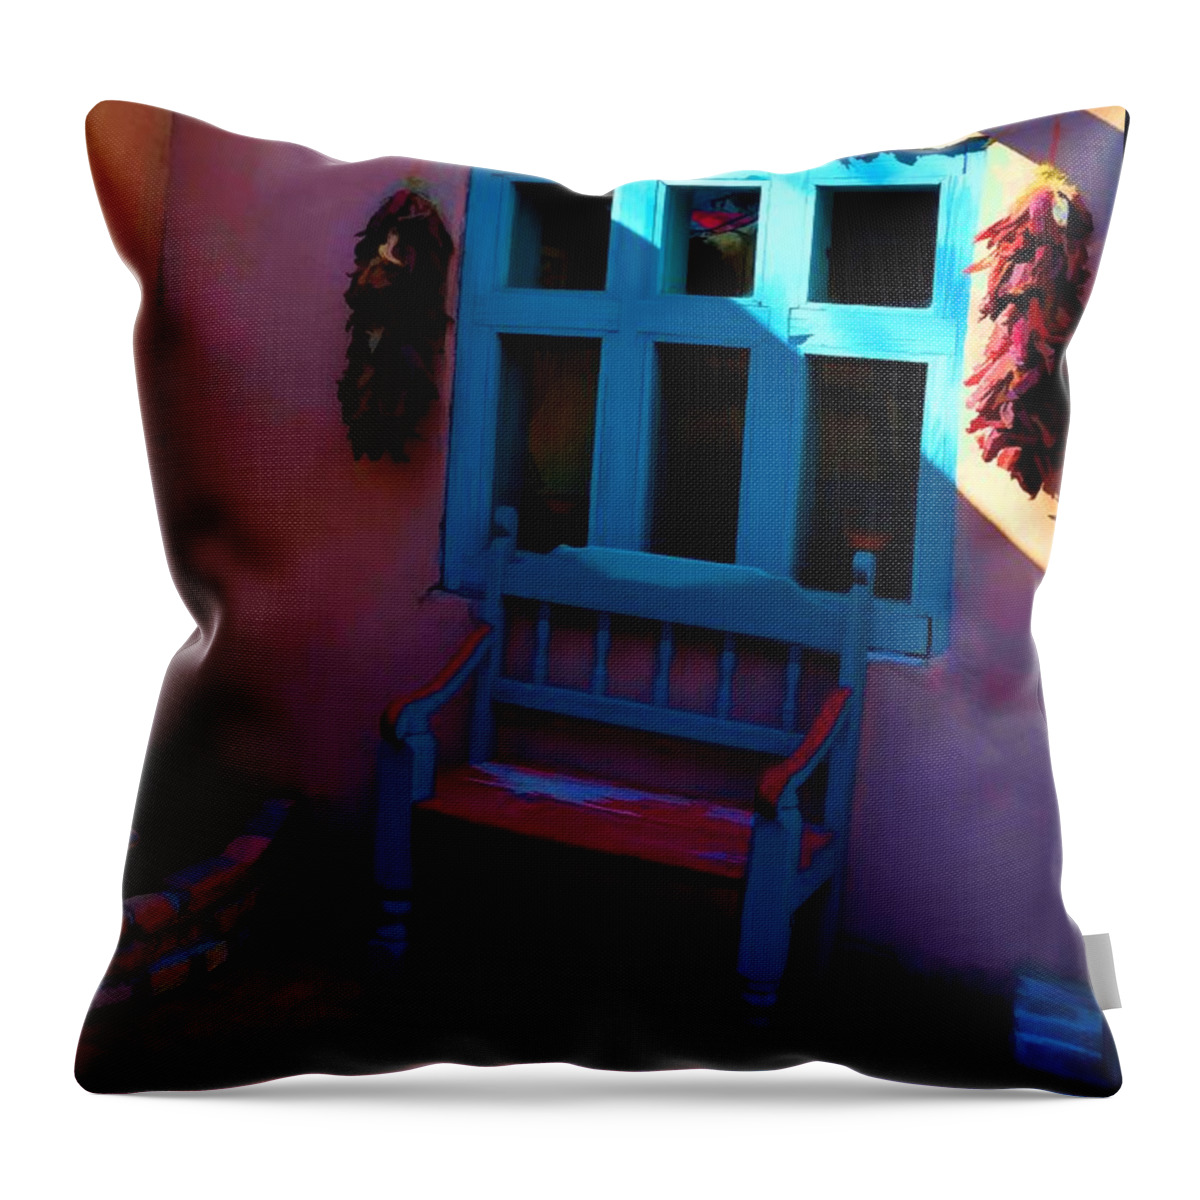 Southwestern Throw Pillow featuring the photograph A Cool Place To Sit by Jan Amiss Photography